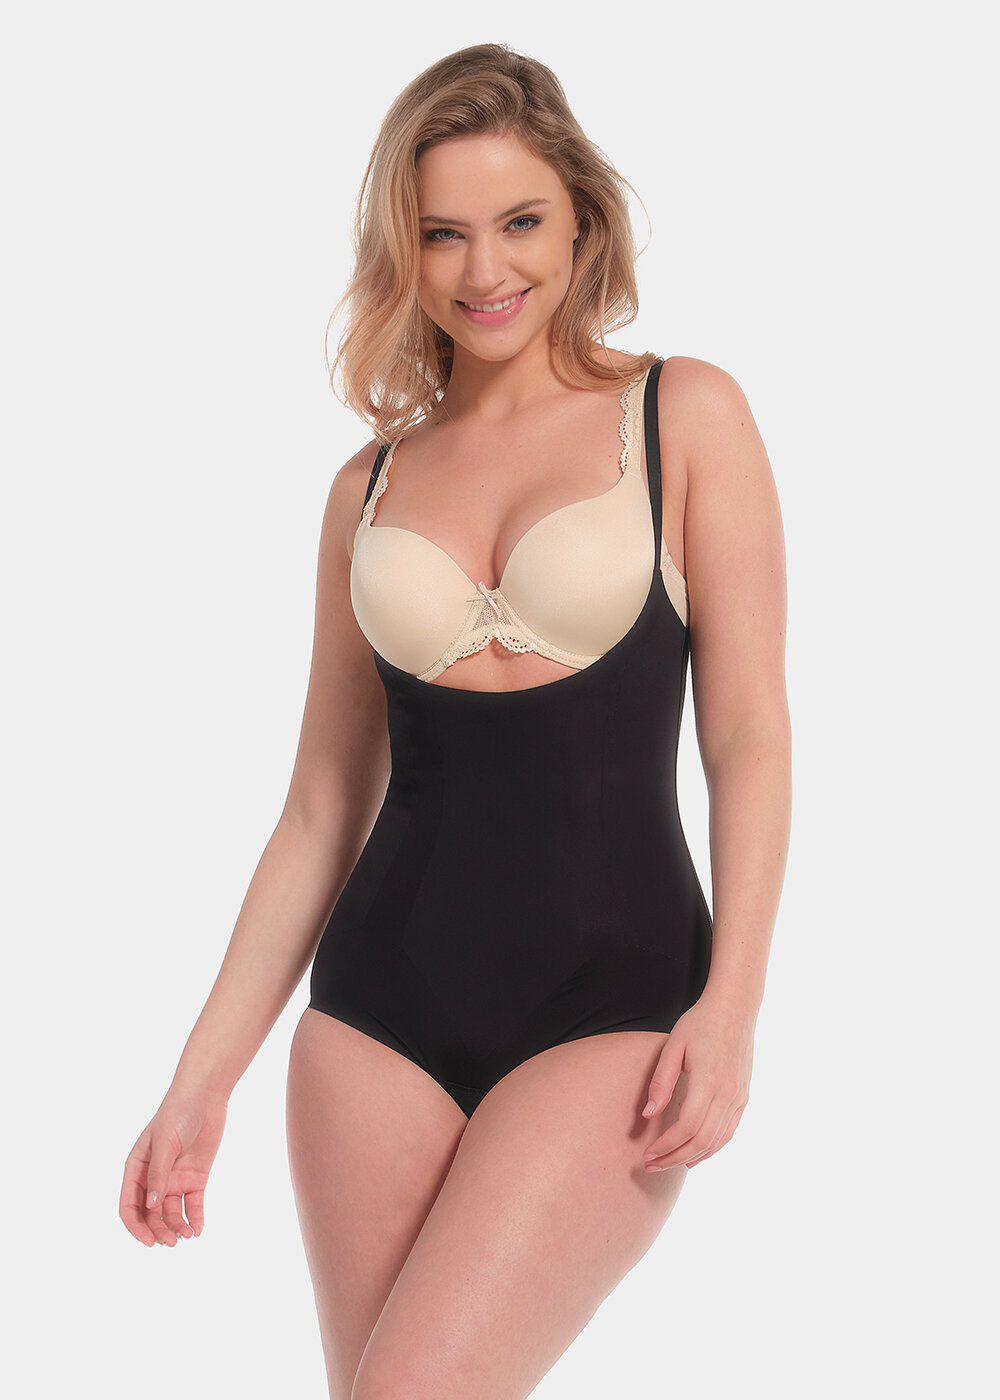 Women's Shapewear Extra Firm Sexy Sheer Shaping BodyBriefer 